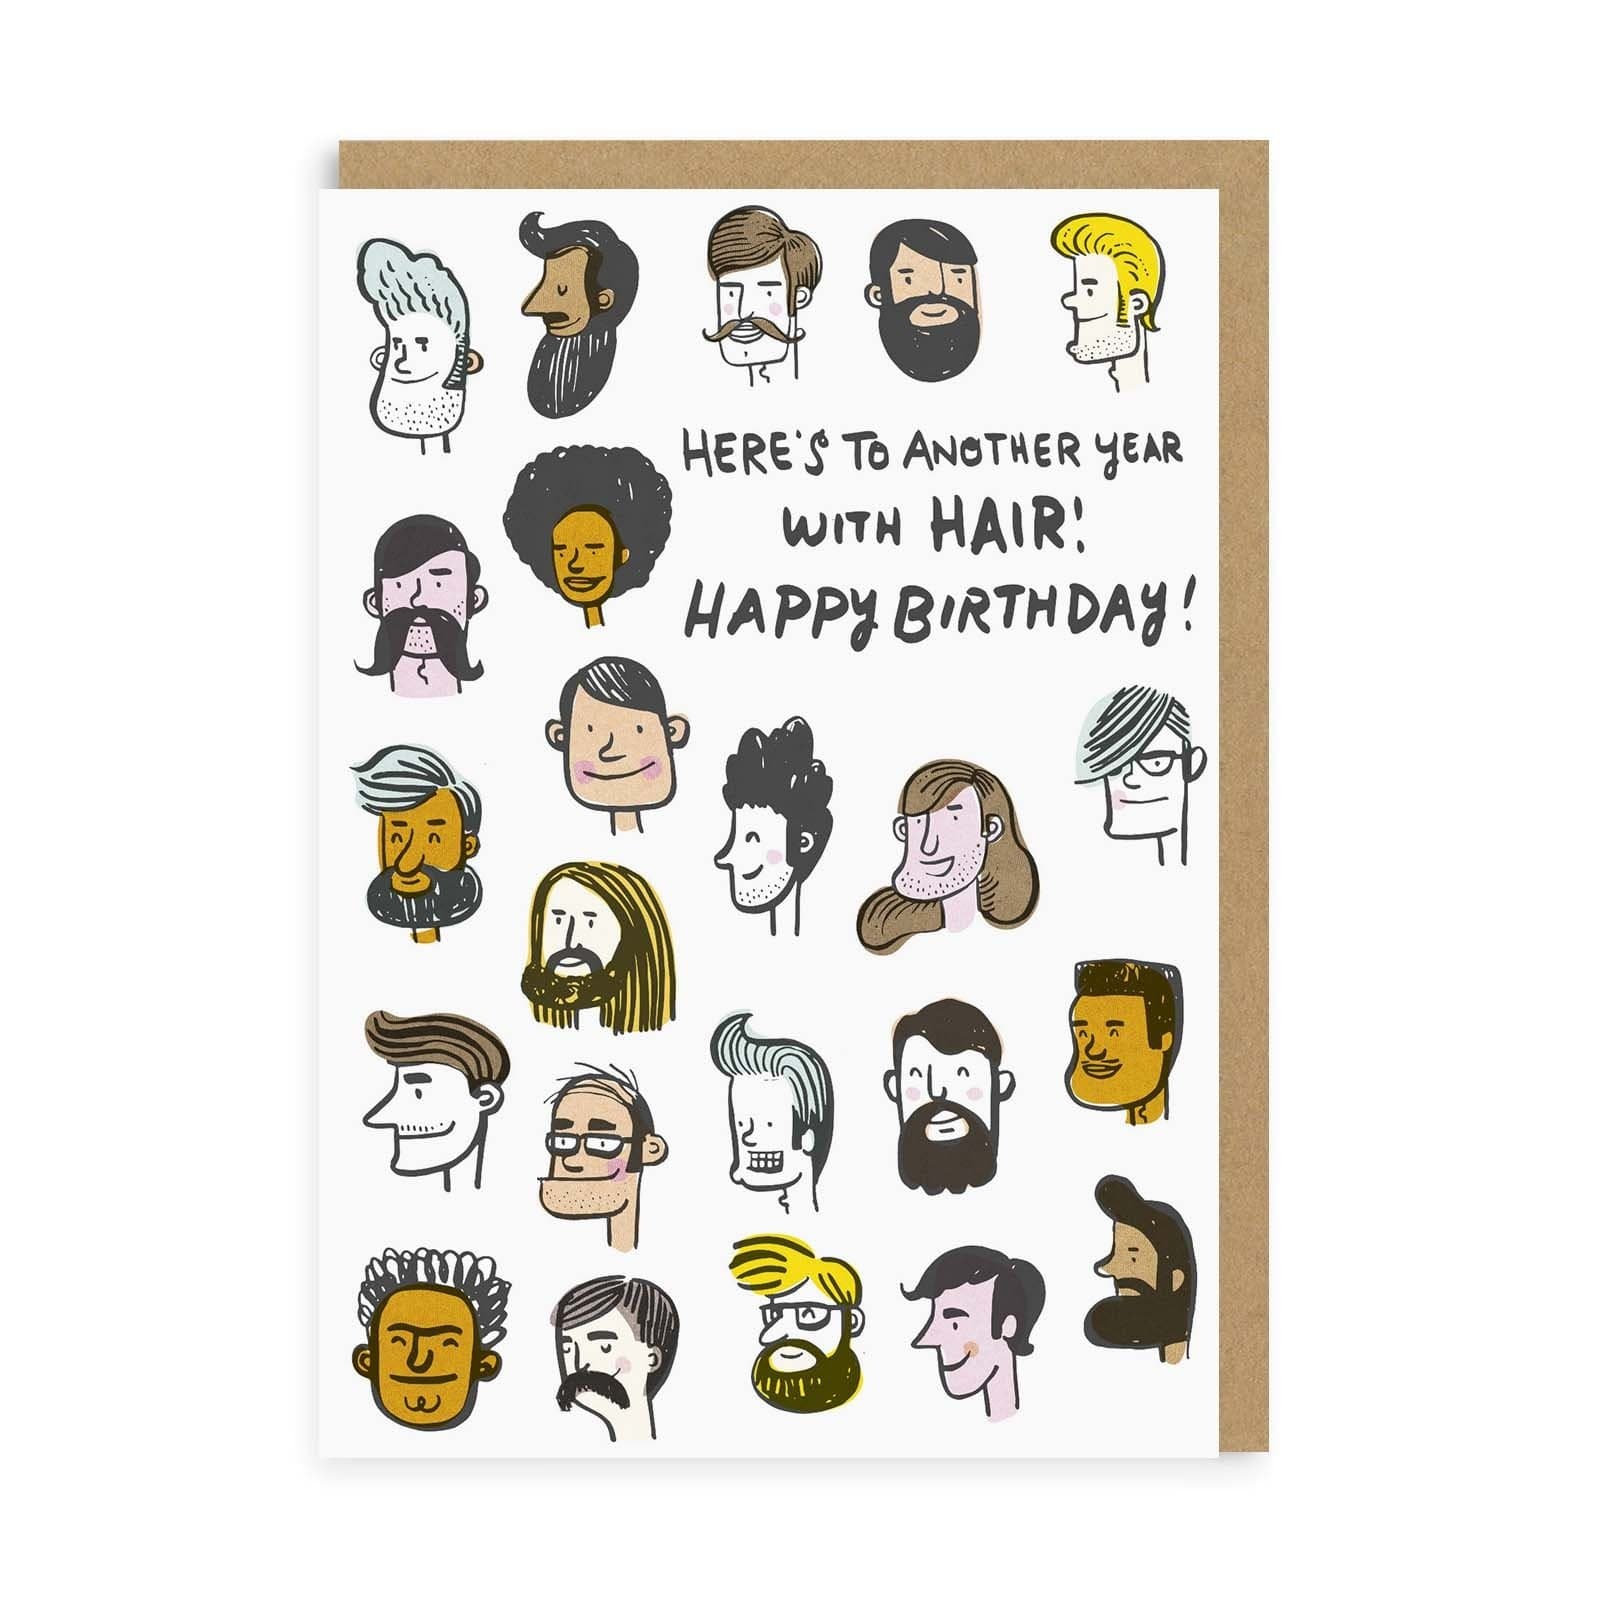 White birthday card with illustrated males faces with hair on head and black text